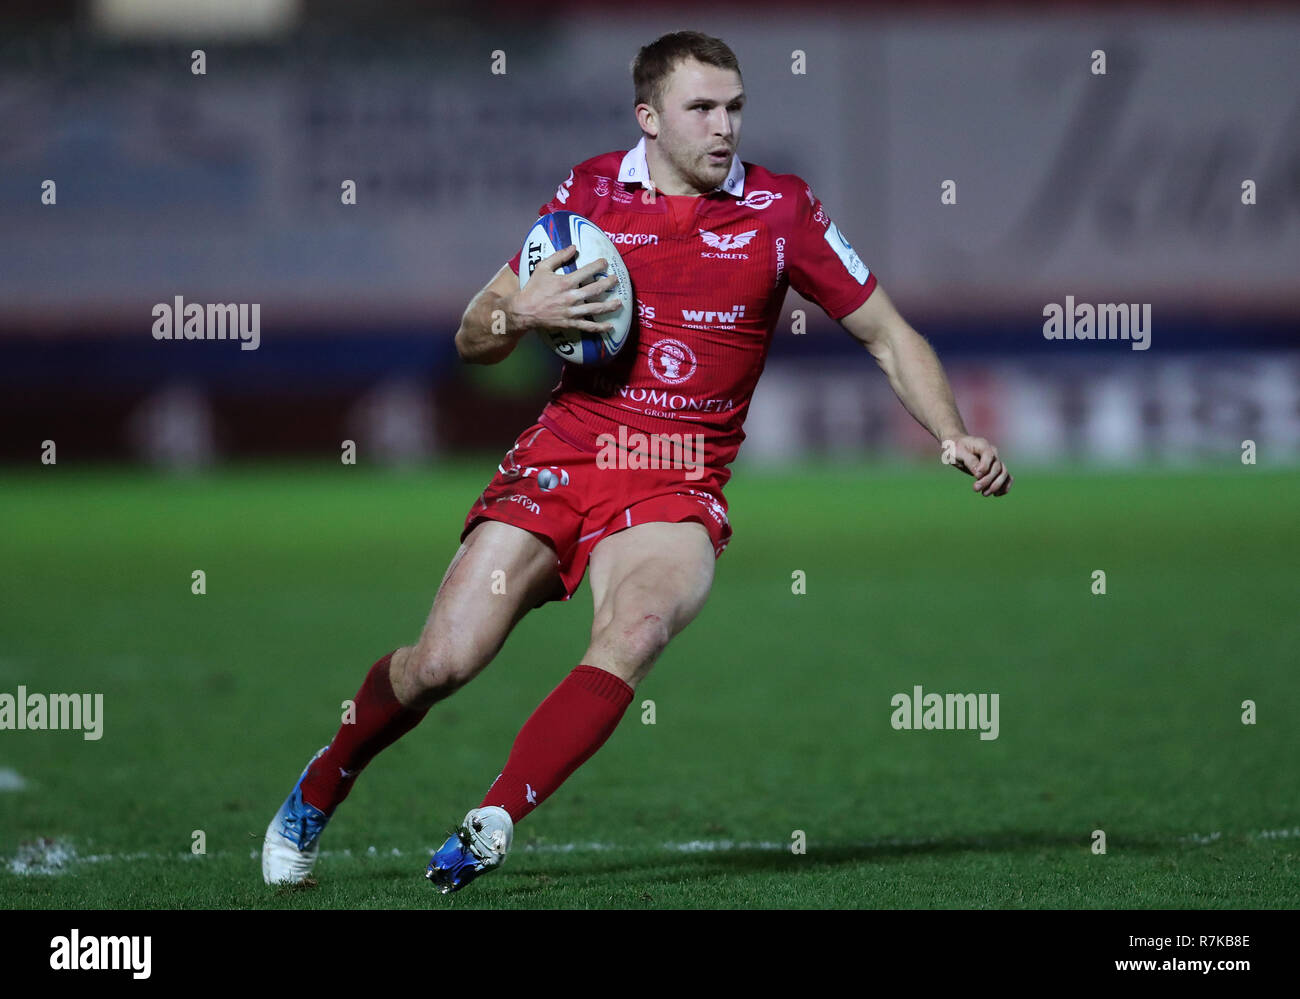 Scarlets Tom Prydie during Heineken Champions Cup, pool four match at Parc y Scarlets, Llanelli. PRESS ASSOCIATION Photo. Picture date: Friday December 7, 2018. See PA story RugbyU Scarlets. Photo credit should read: David Davies/PA Wire. RESTRICTIONS: Editorial use only. No commercial use. Stock Photo